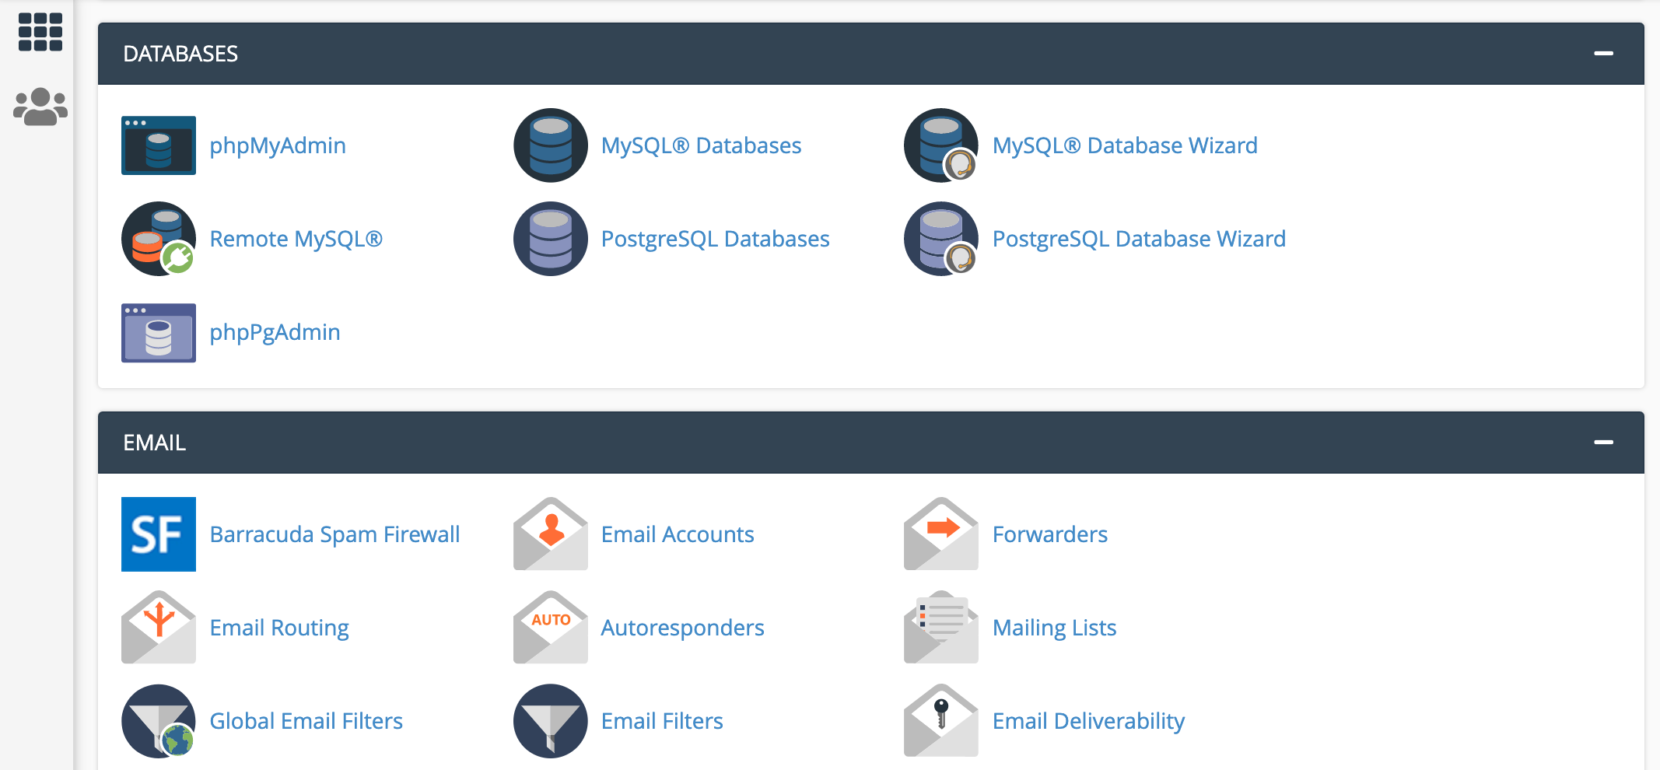 The Databases section of the cPanel dashboard.